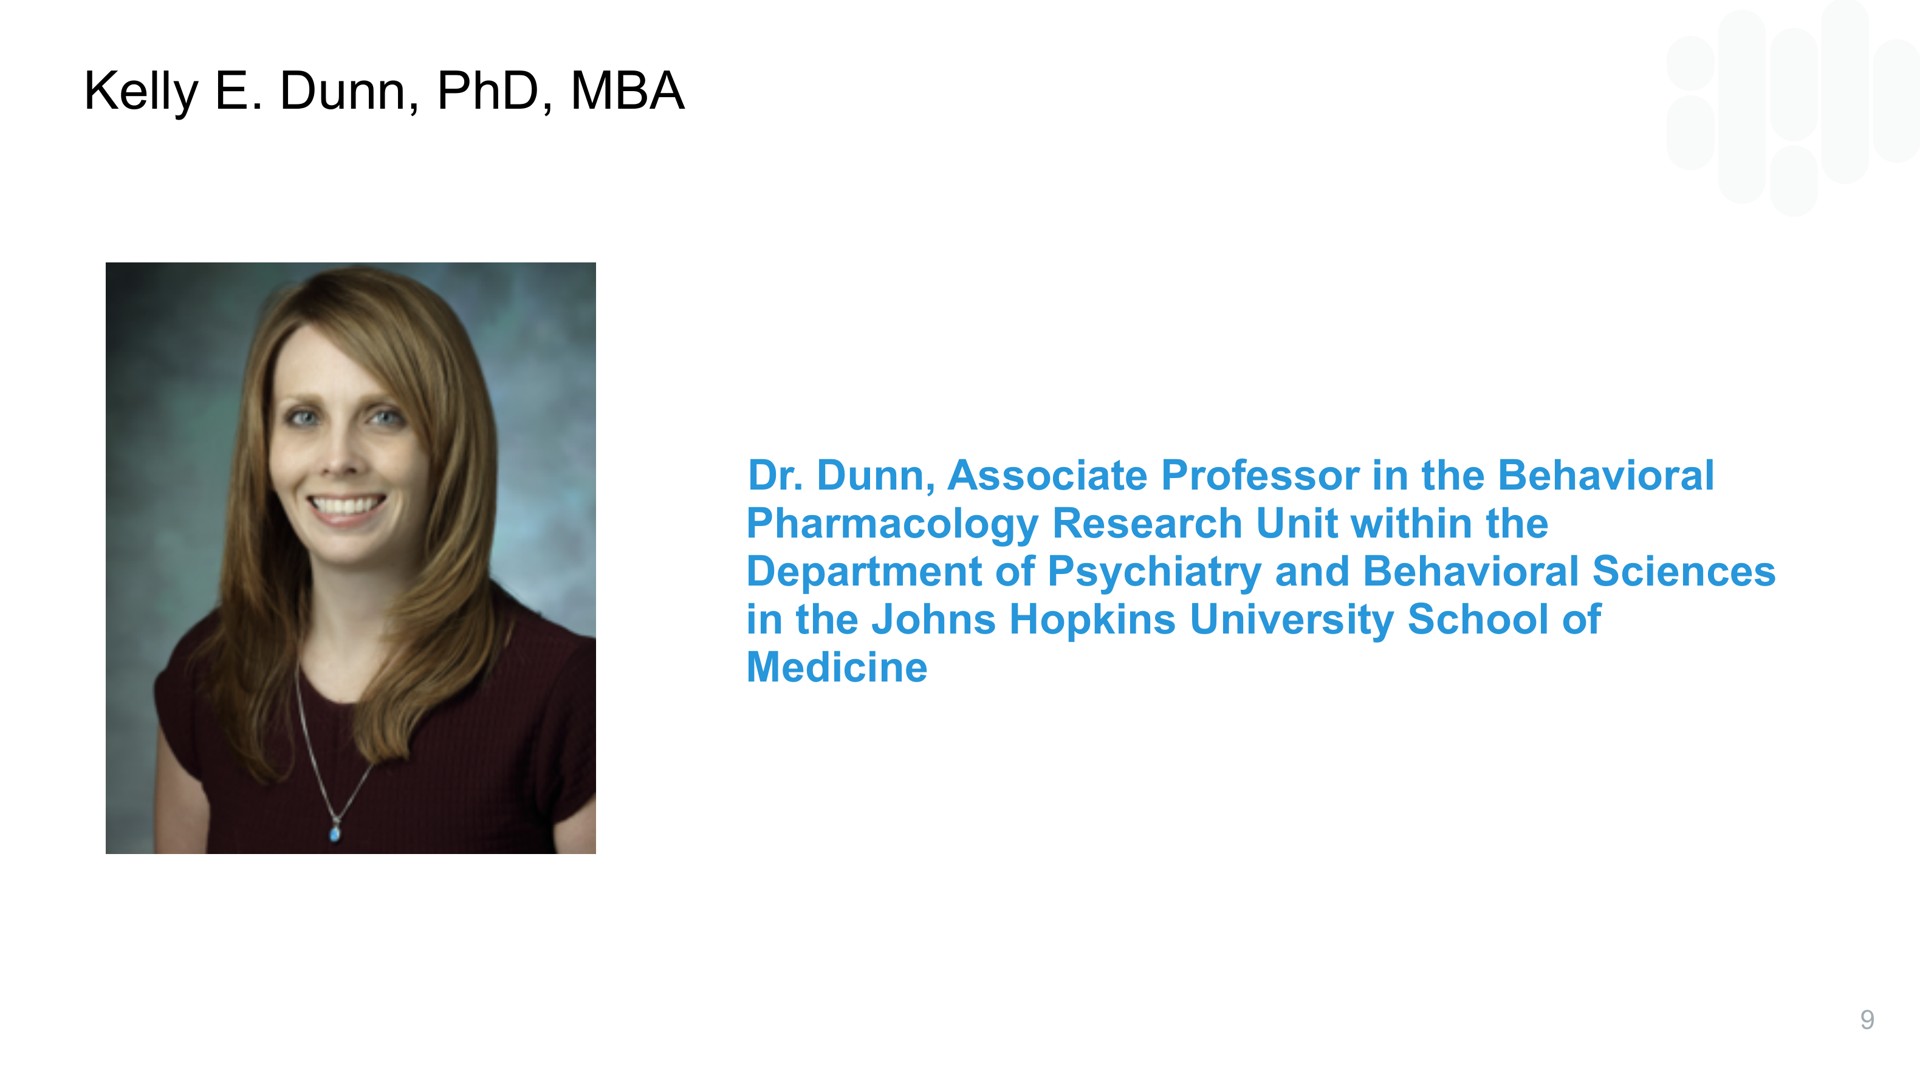 kelly associate professor in the behavioral pharmacology research unit within the department of psychiatry and behavioral sciences in the university school of medicine | MindMed